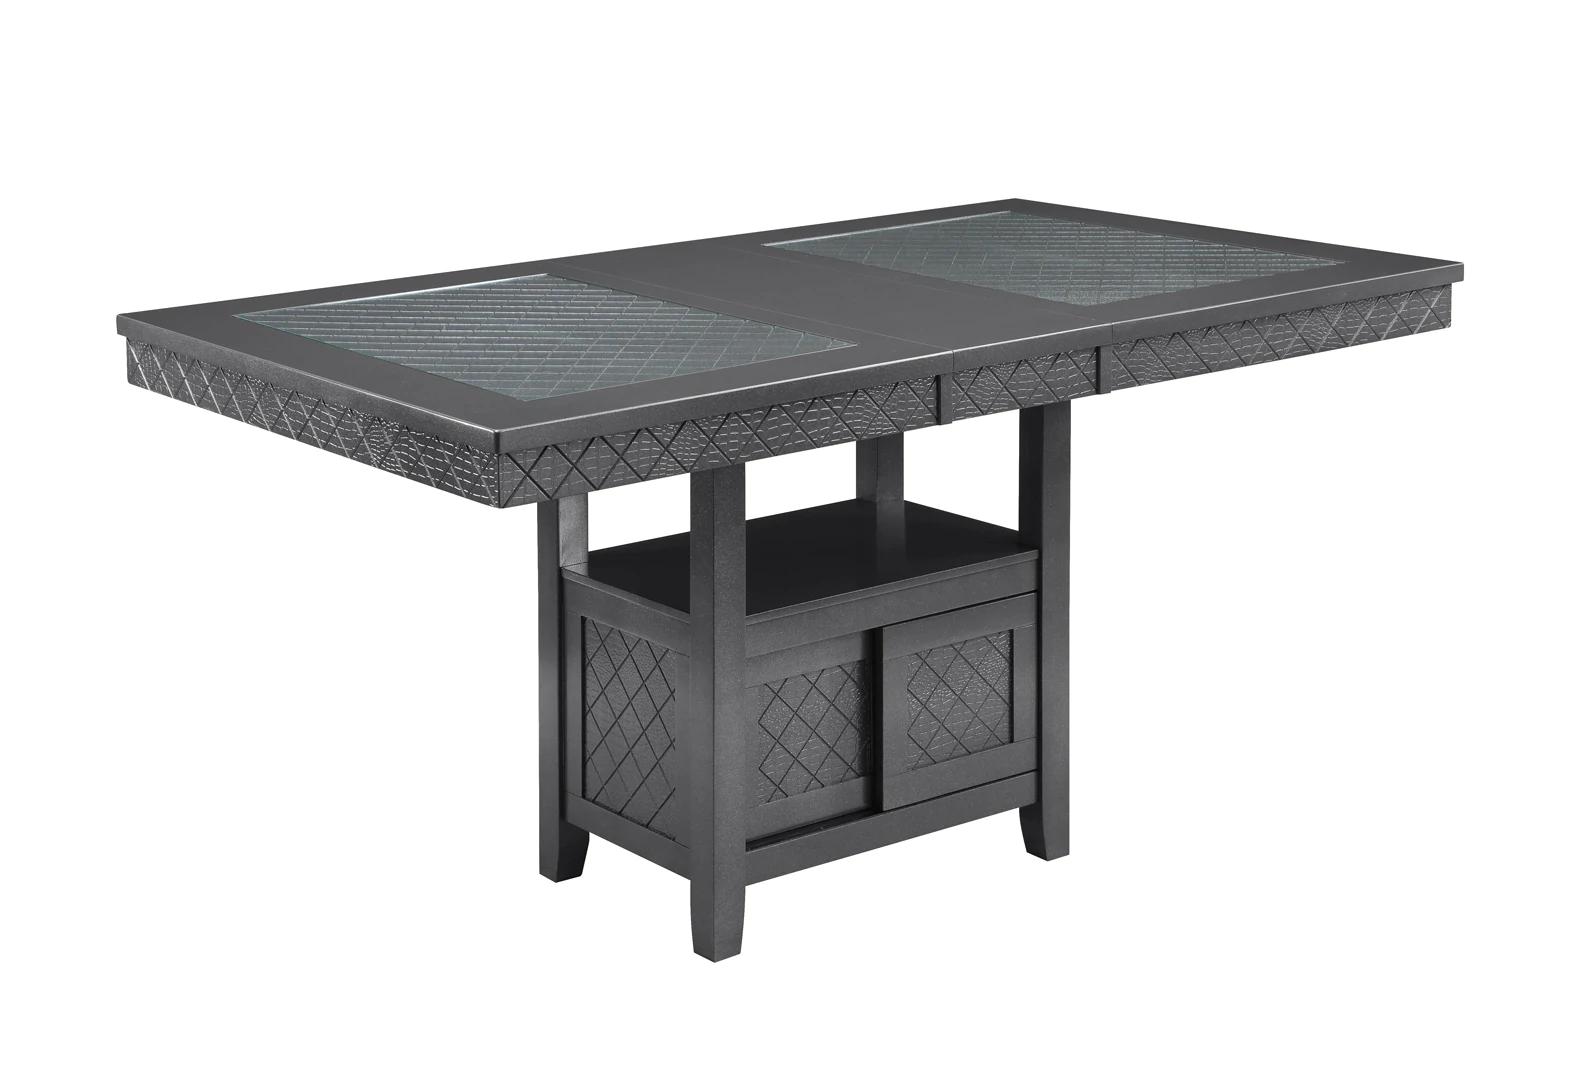 Traditional, Cottage Counter Height Table Bankston 2670ZC-4272 in Gunmetal, Brown PU